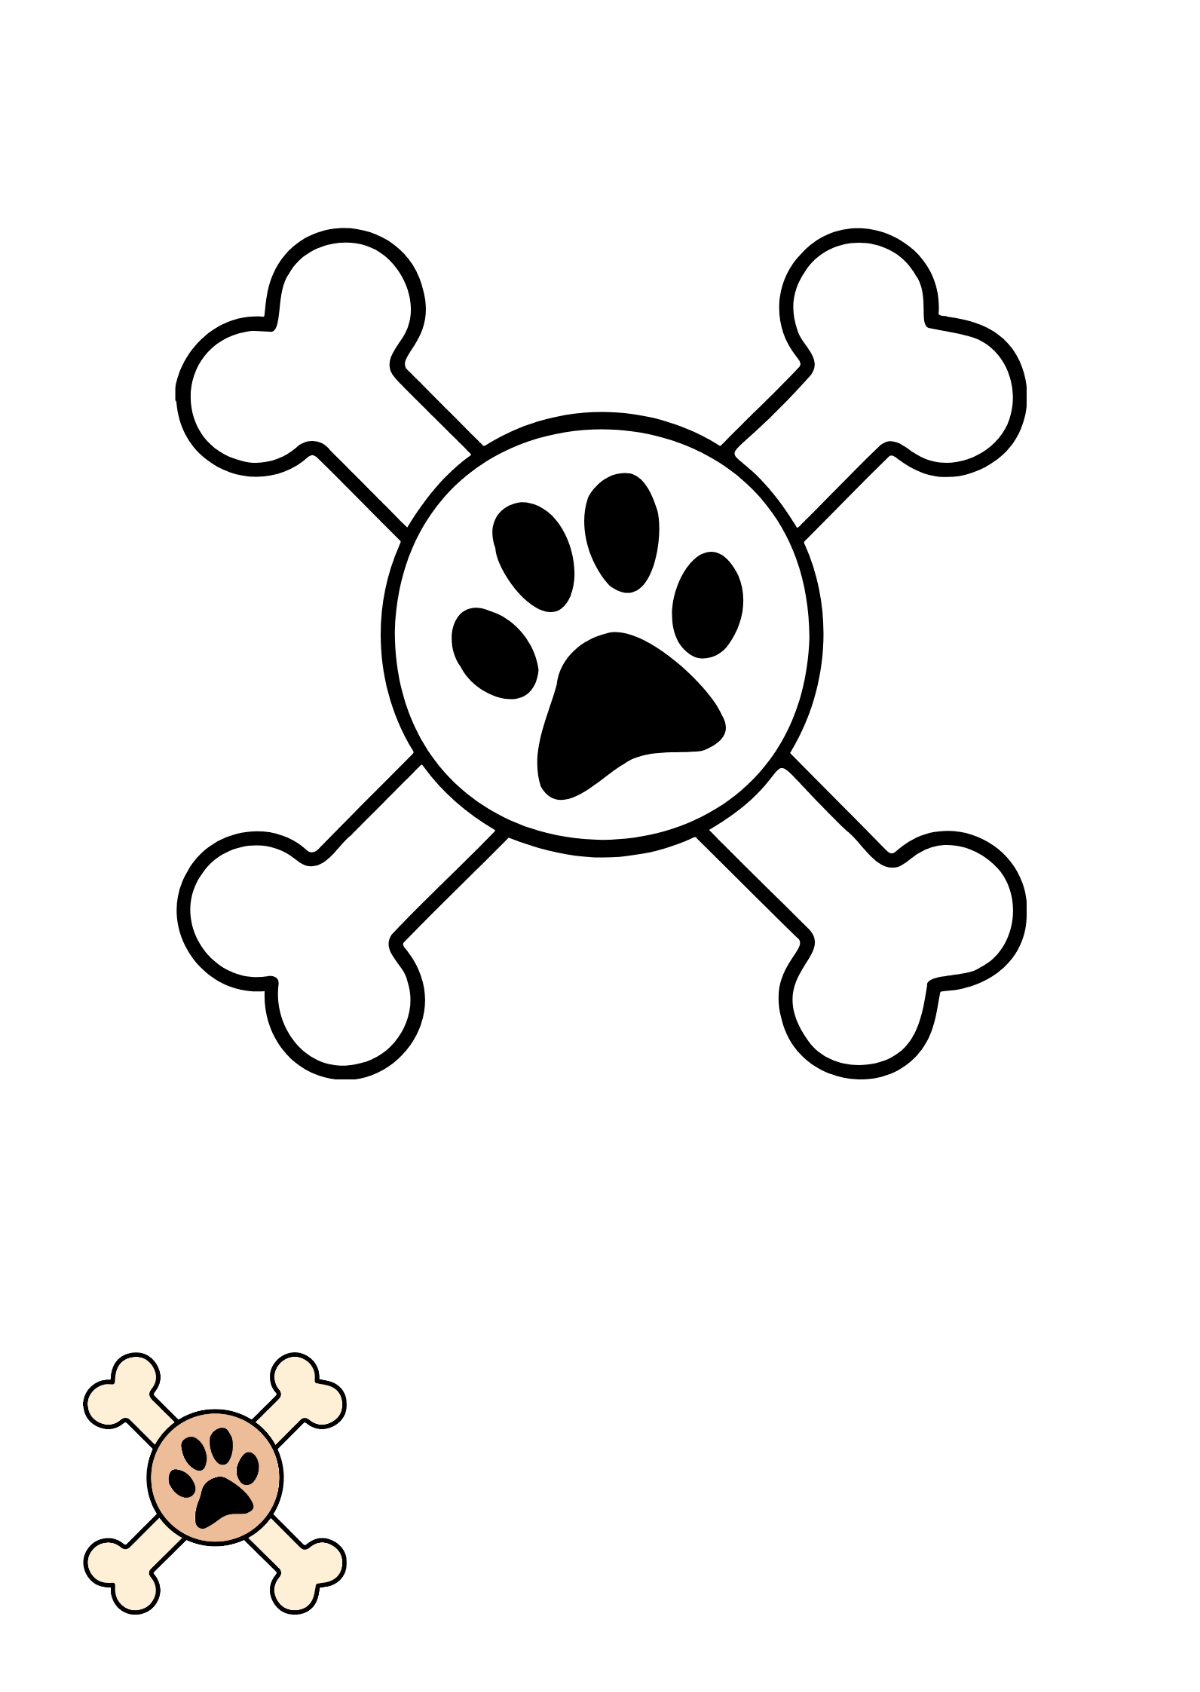 Dog Bone and Paw Coloring Page Template